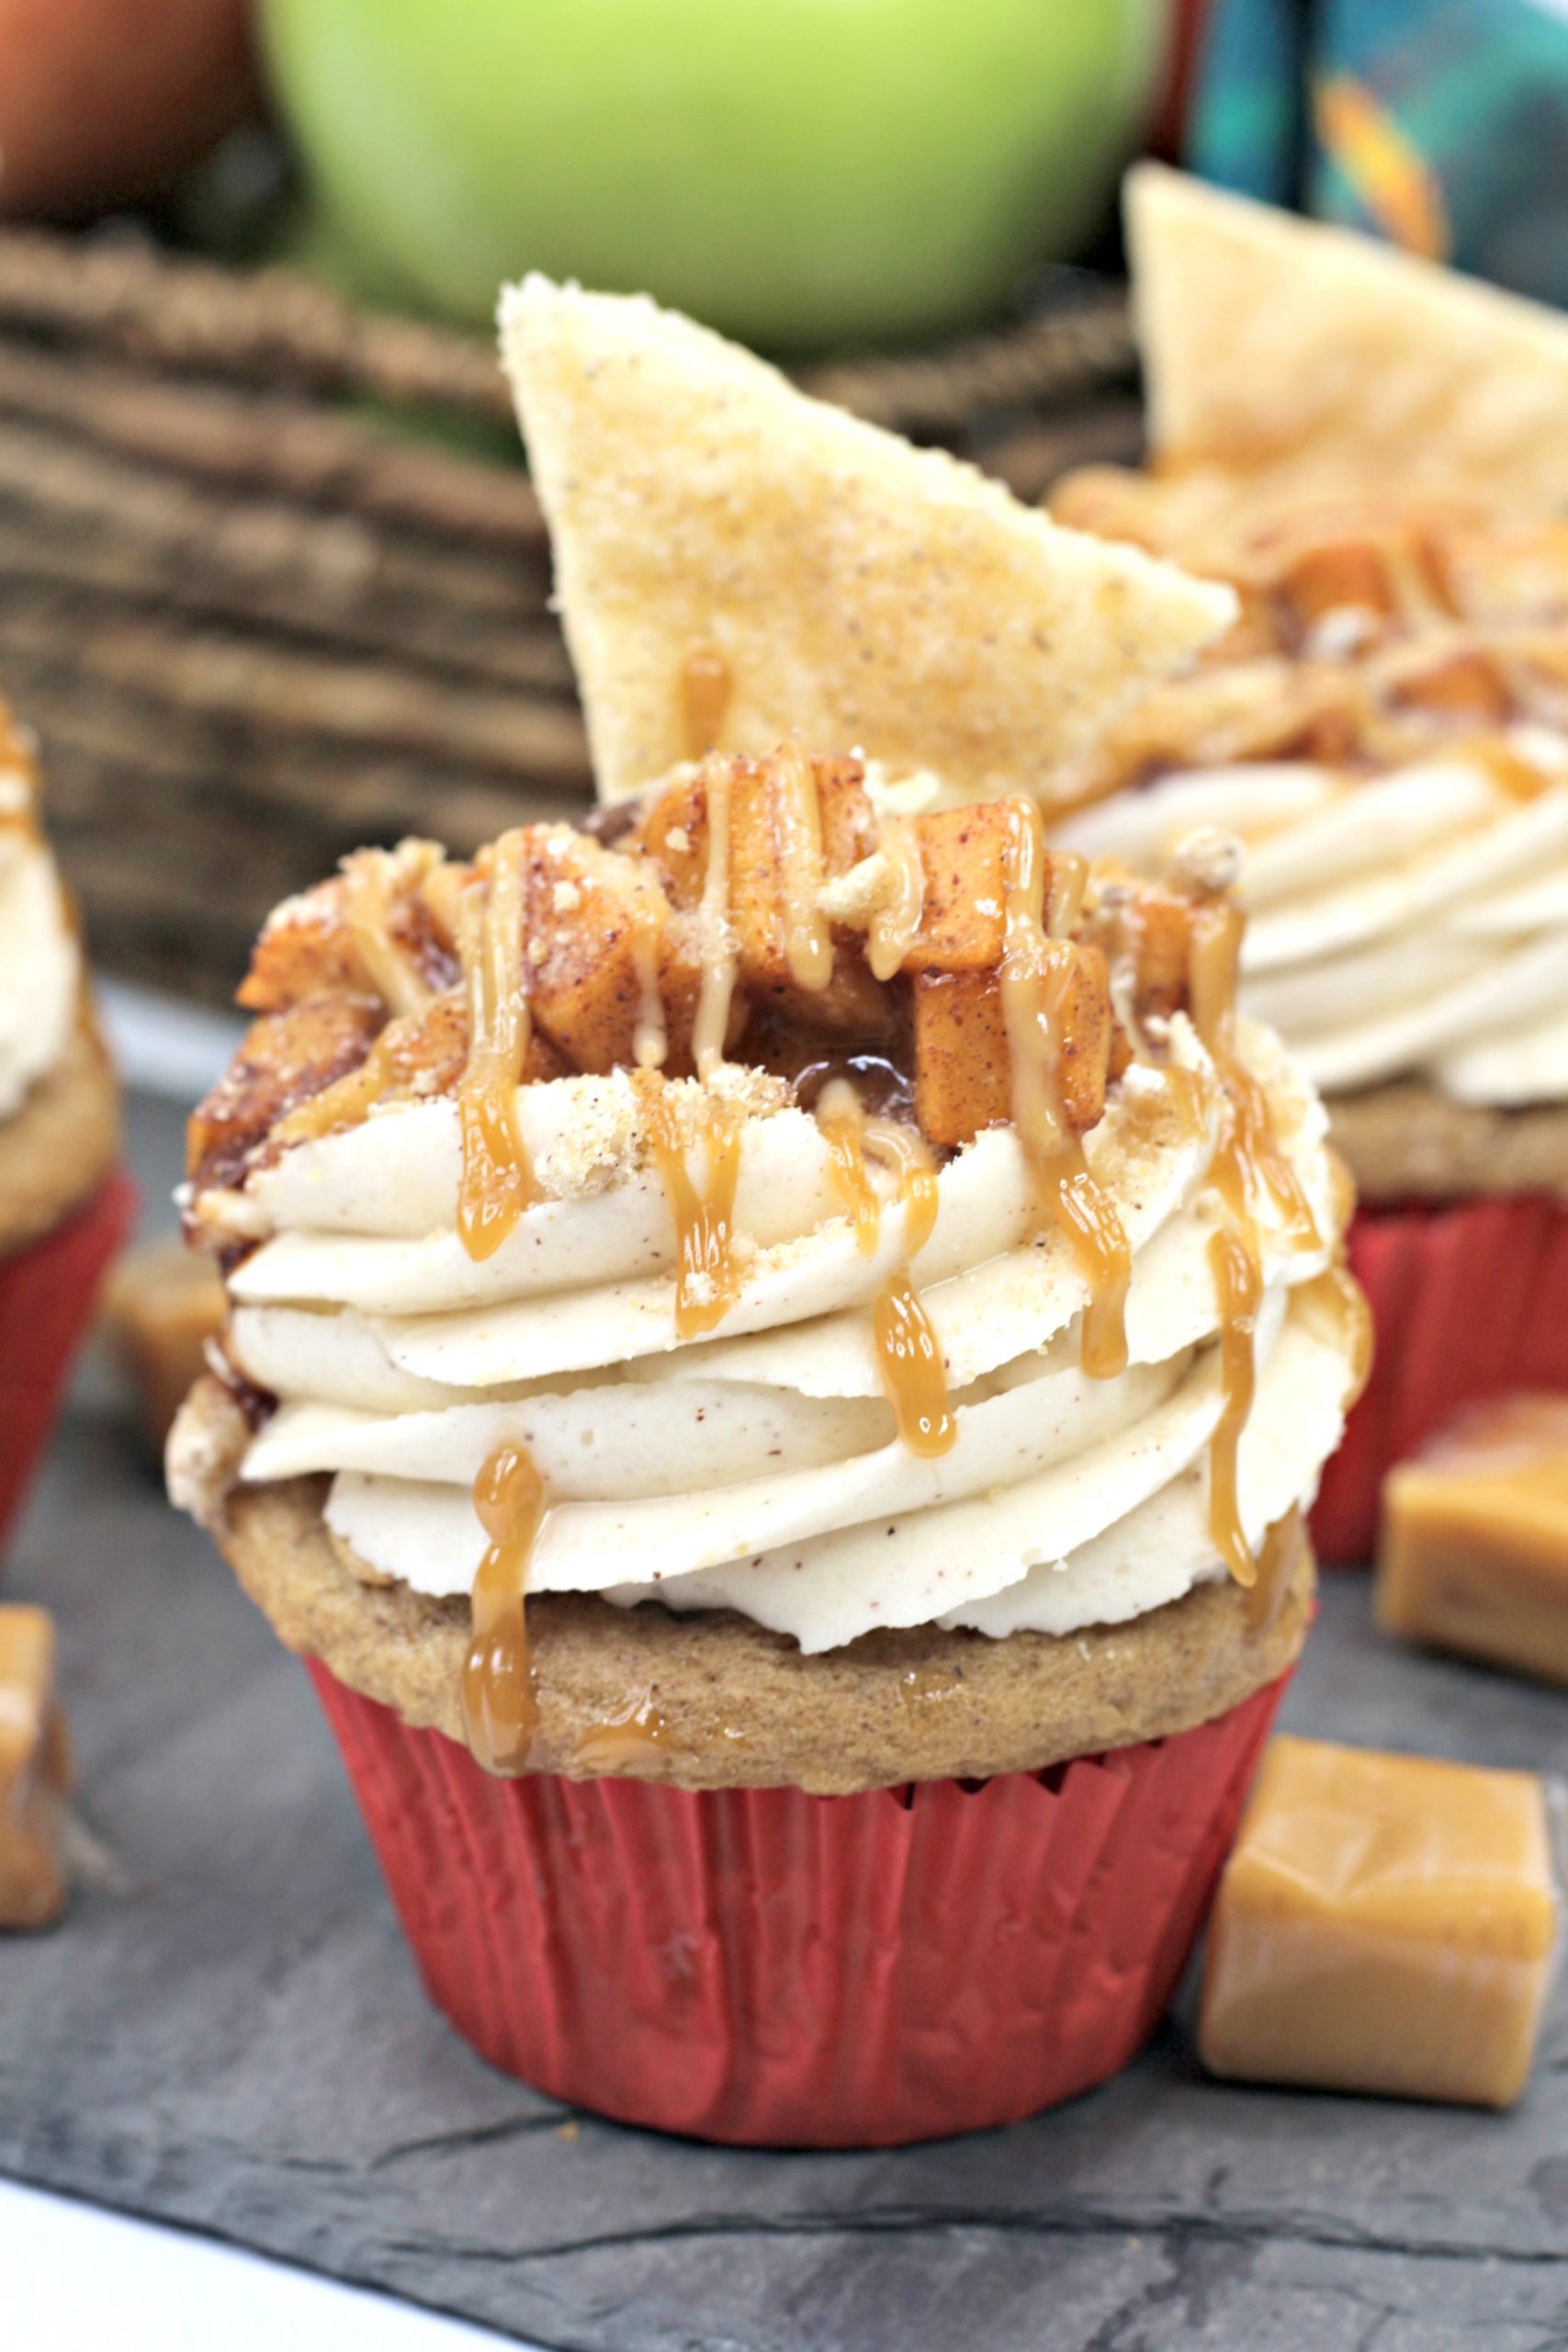 A close up of one of the Apple Pie Cupcakes.